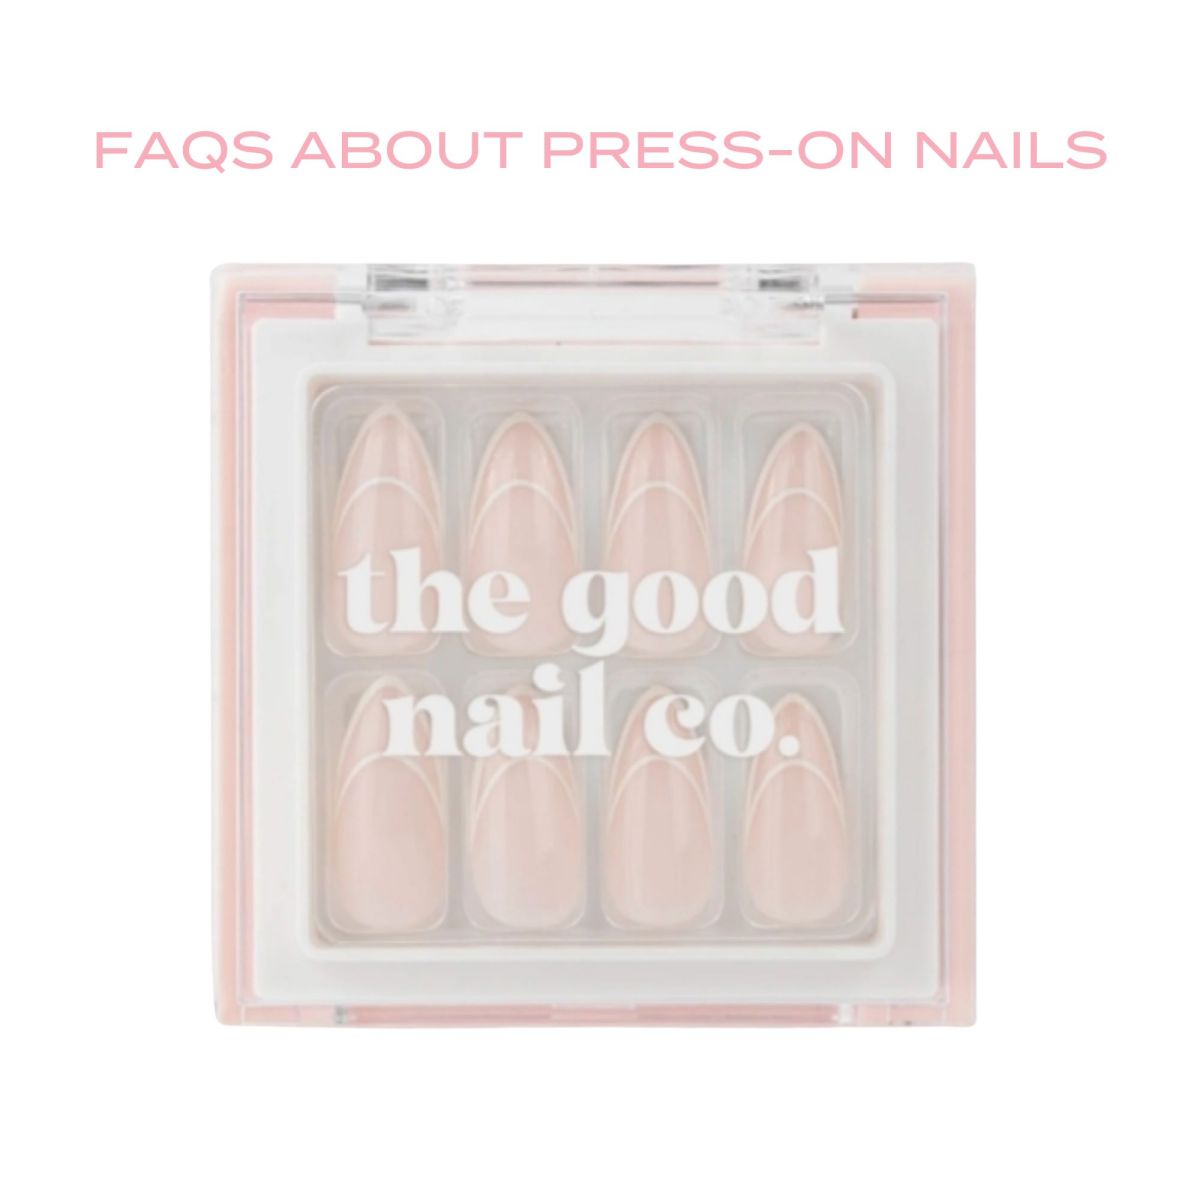 can you re-use false nails